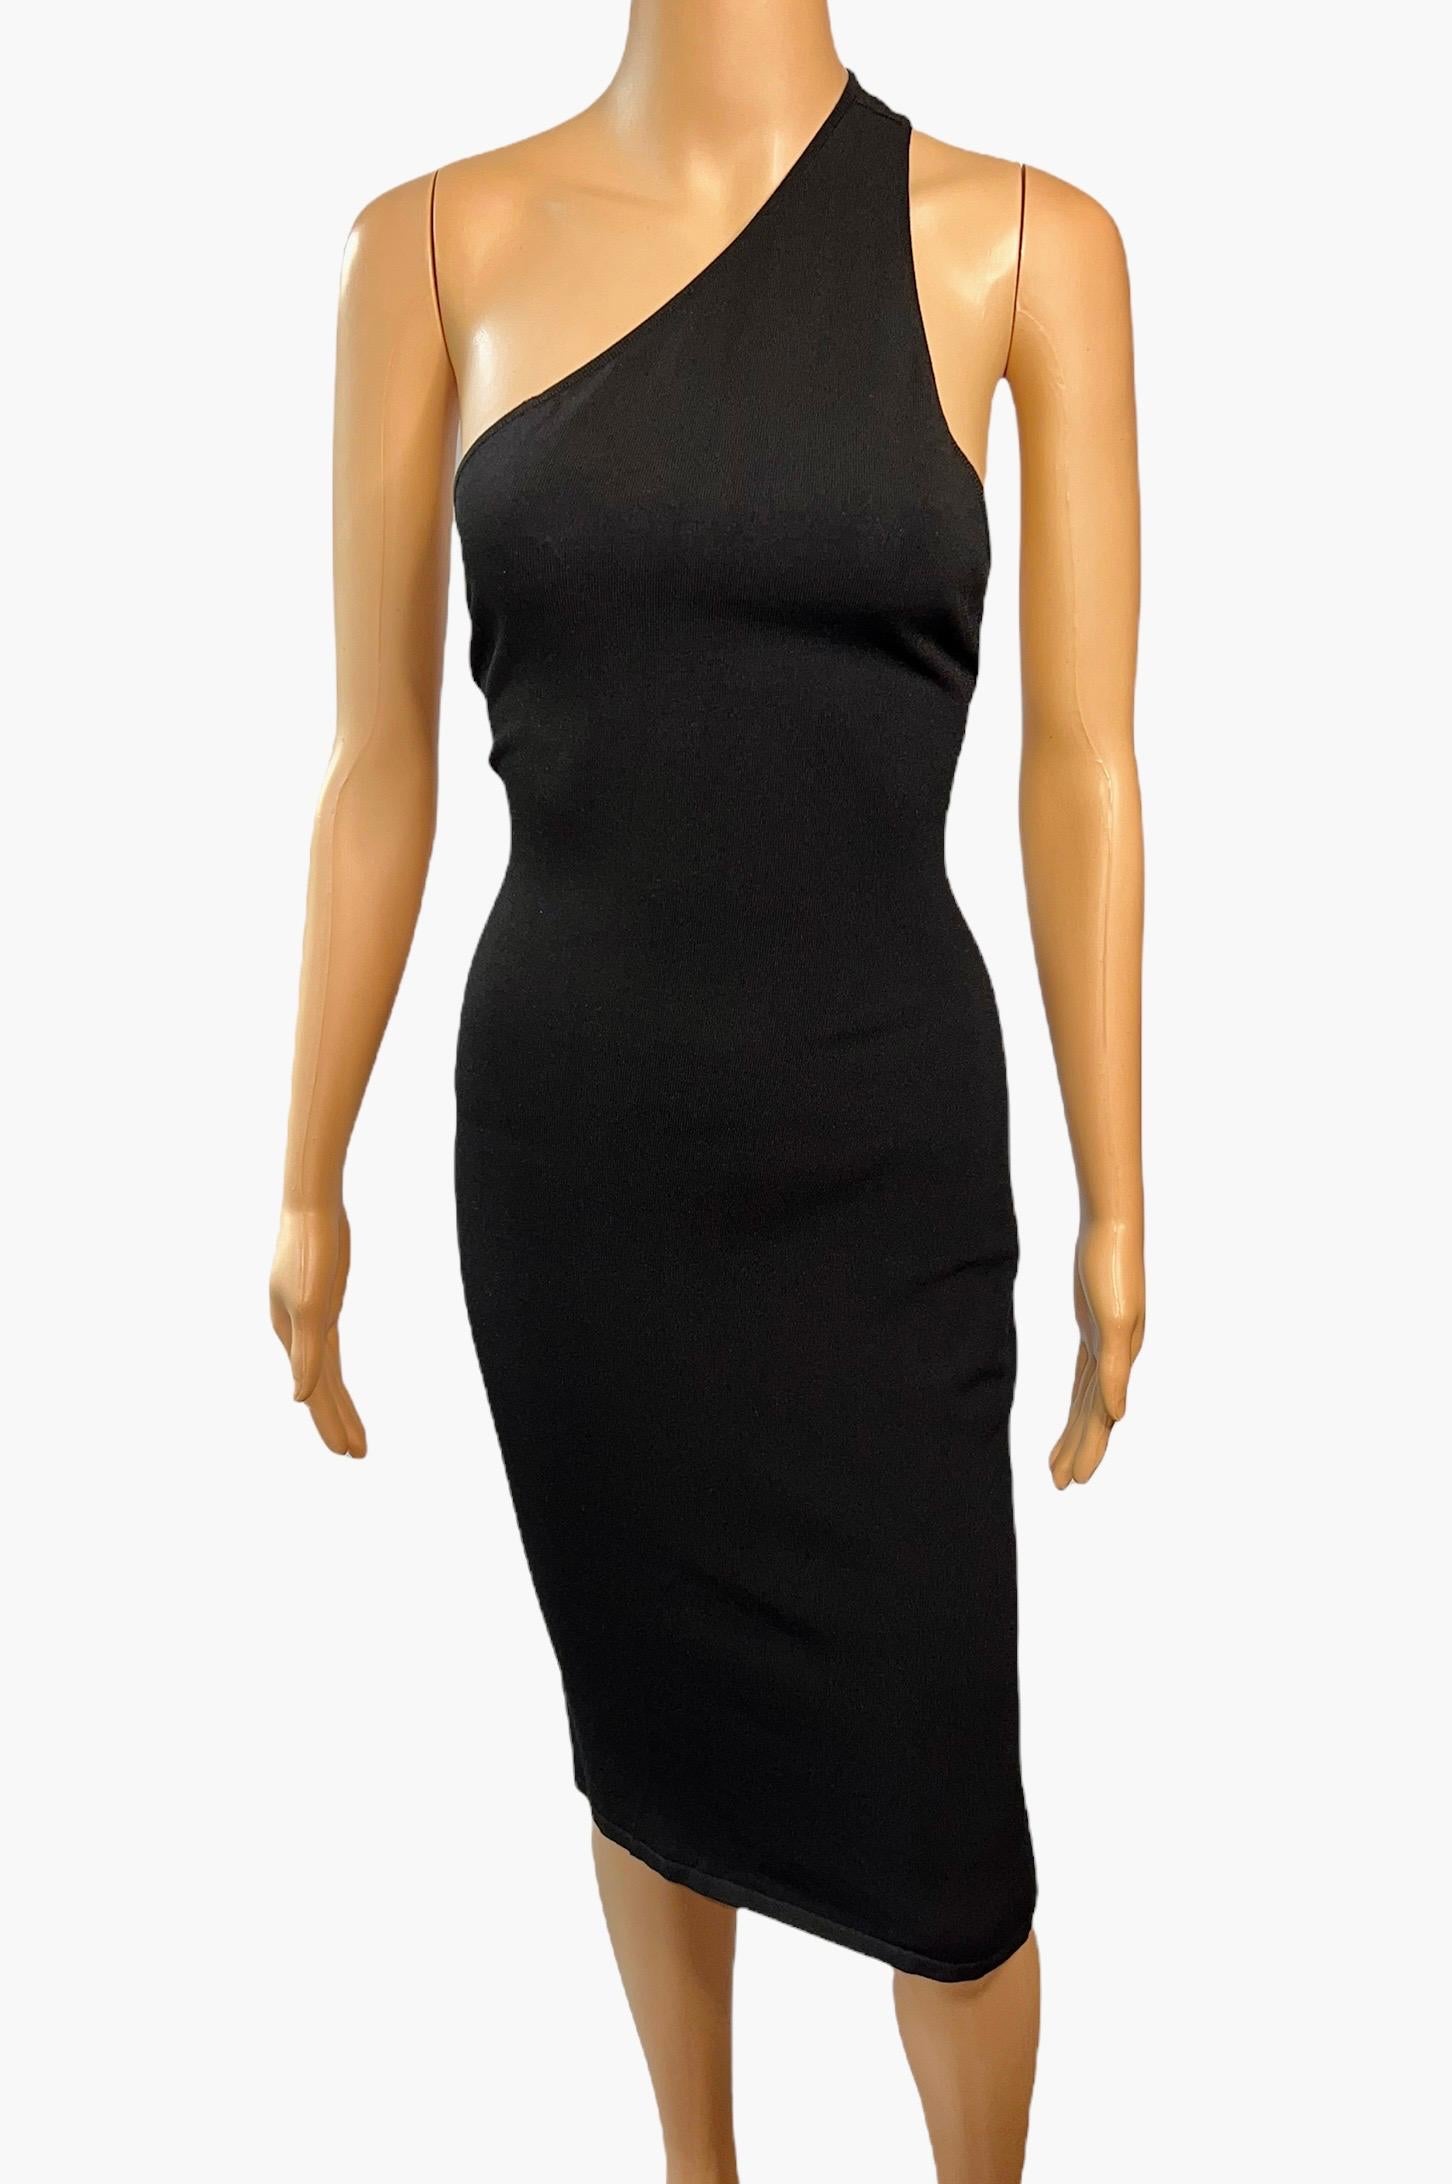 Tom Ford for Gucci S/S 2000 Cutout Bodycon Knit Black Dress For Sale 1